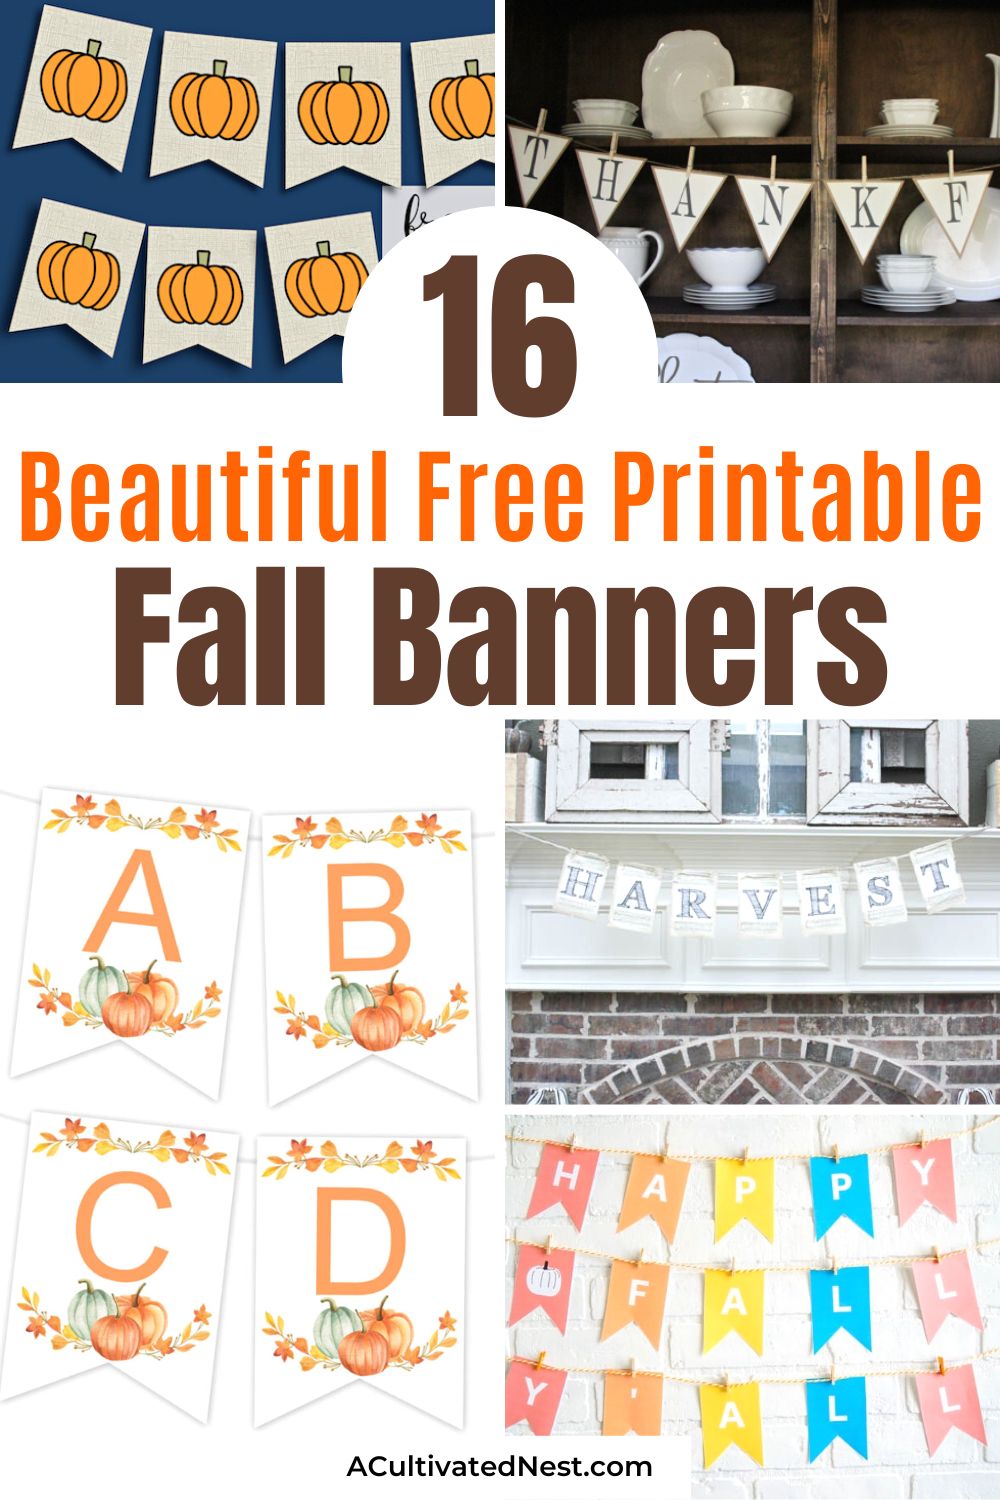 16 Beautiful Free Printable Fall Banners- Celebrate the beauty of fall with our collection of free printable banners. Perfect for decorating your home, parties, and events. Embrace the colors of the season! | #freePrintable #printables #banners #fallDecor #ACultivatedNest